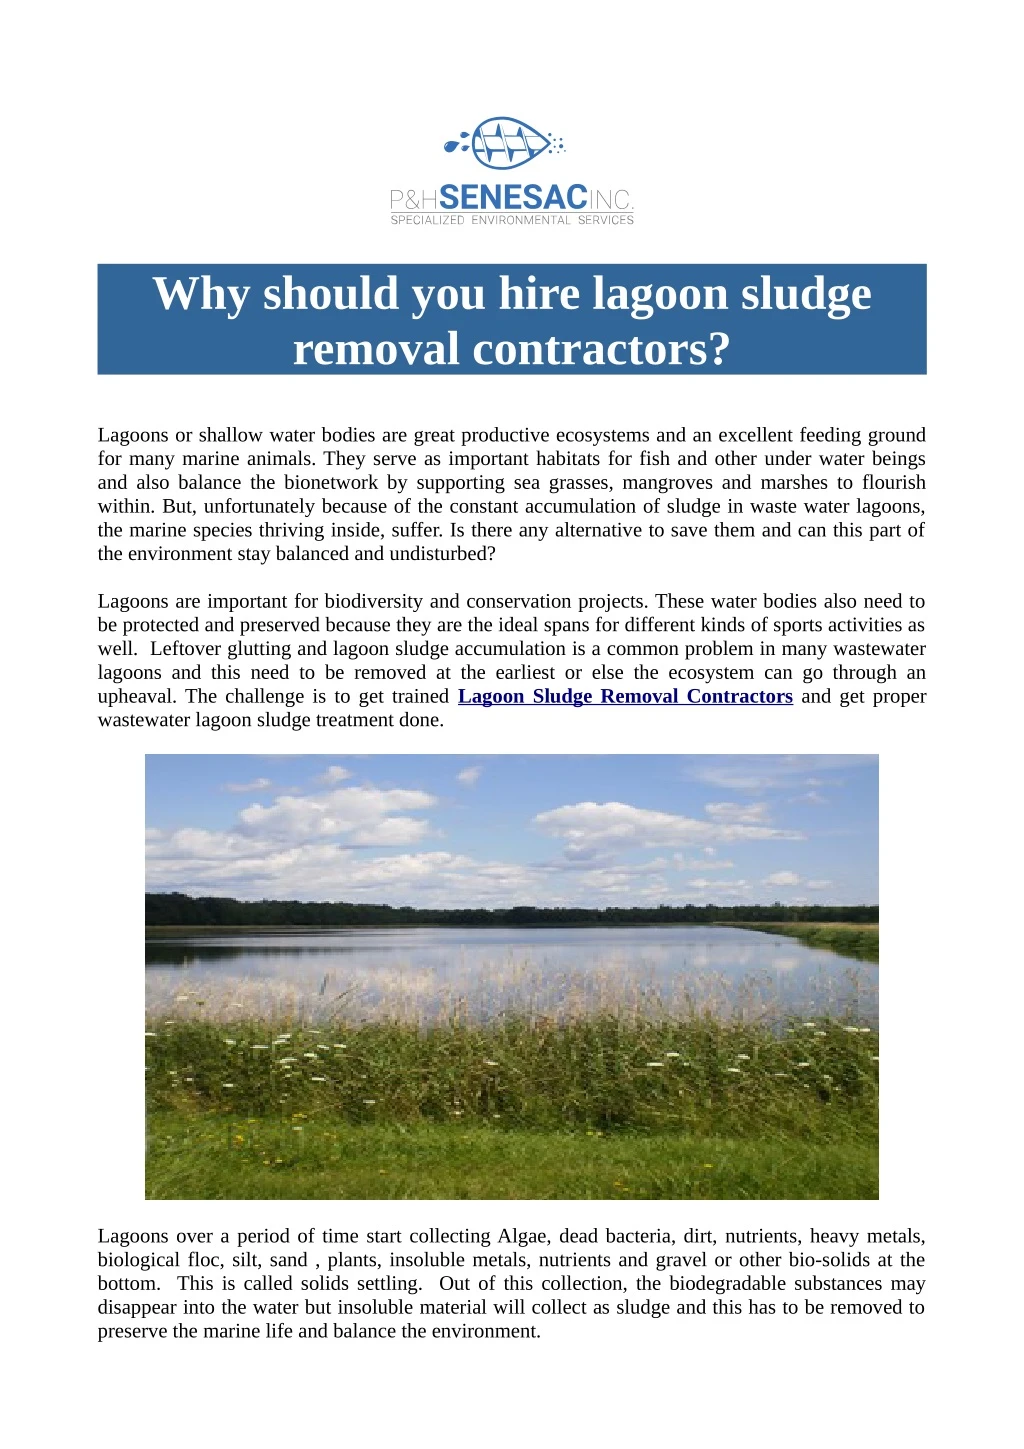 why should you hire lagoon sludge removal